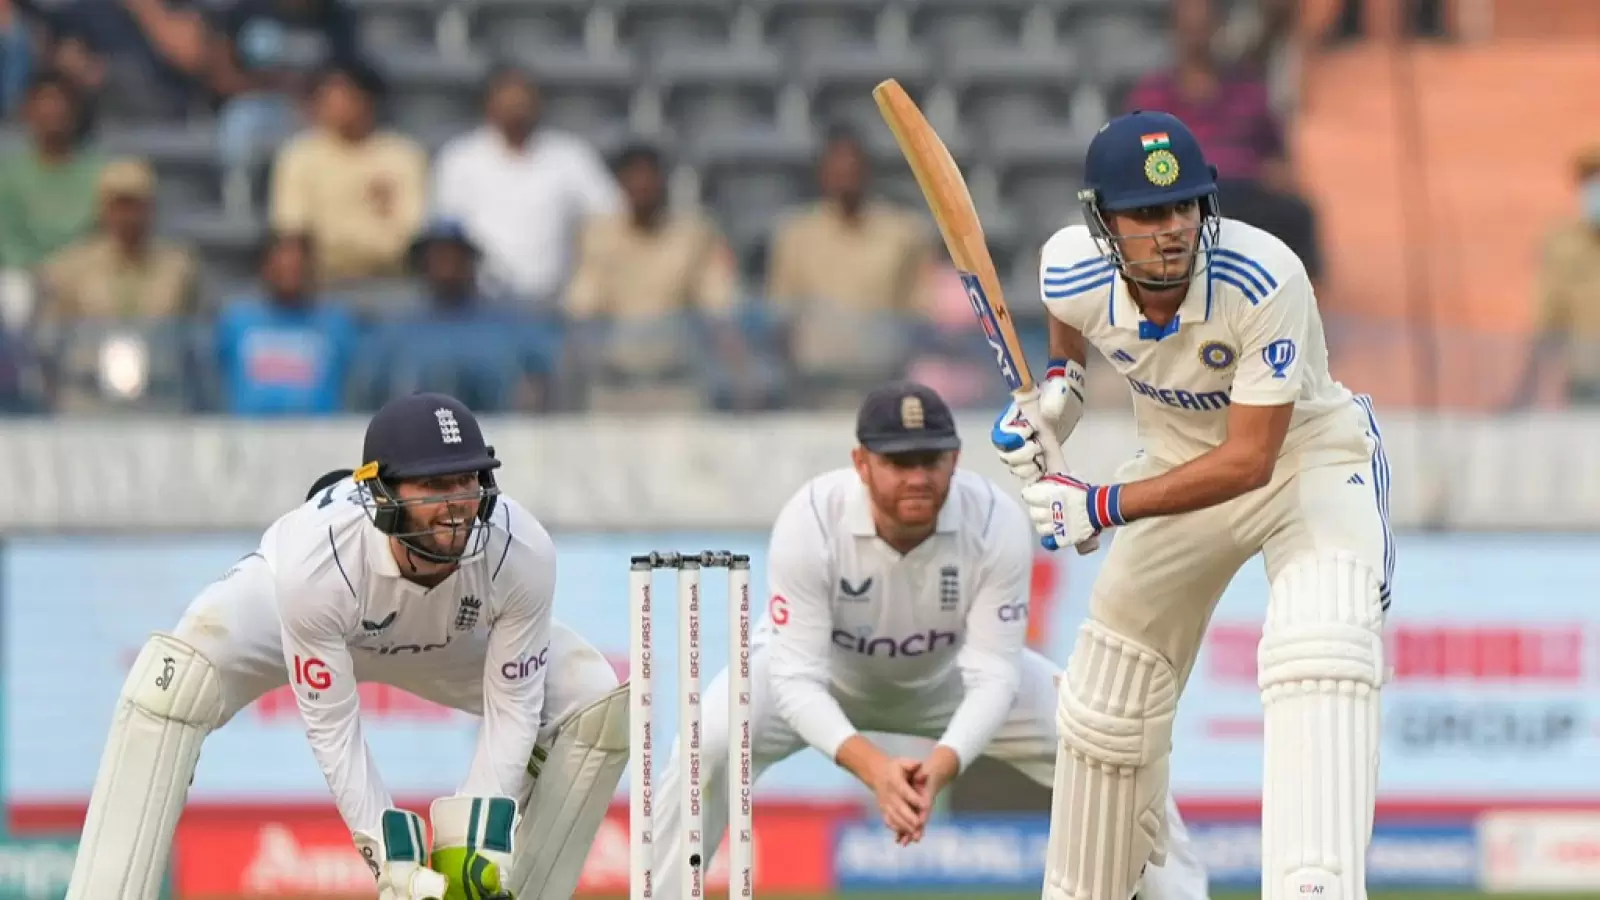 IND vs ENG: Shubman Gill half-century, Rohit-Iyer failed again, India's score 130/4 till lunch on the third day